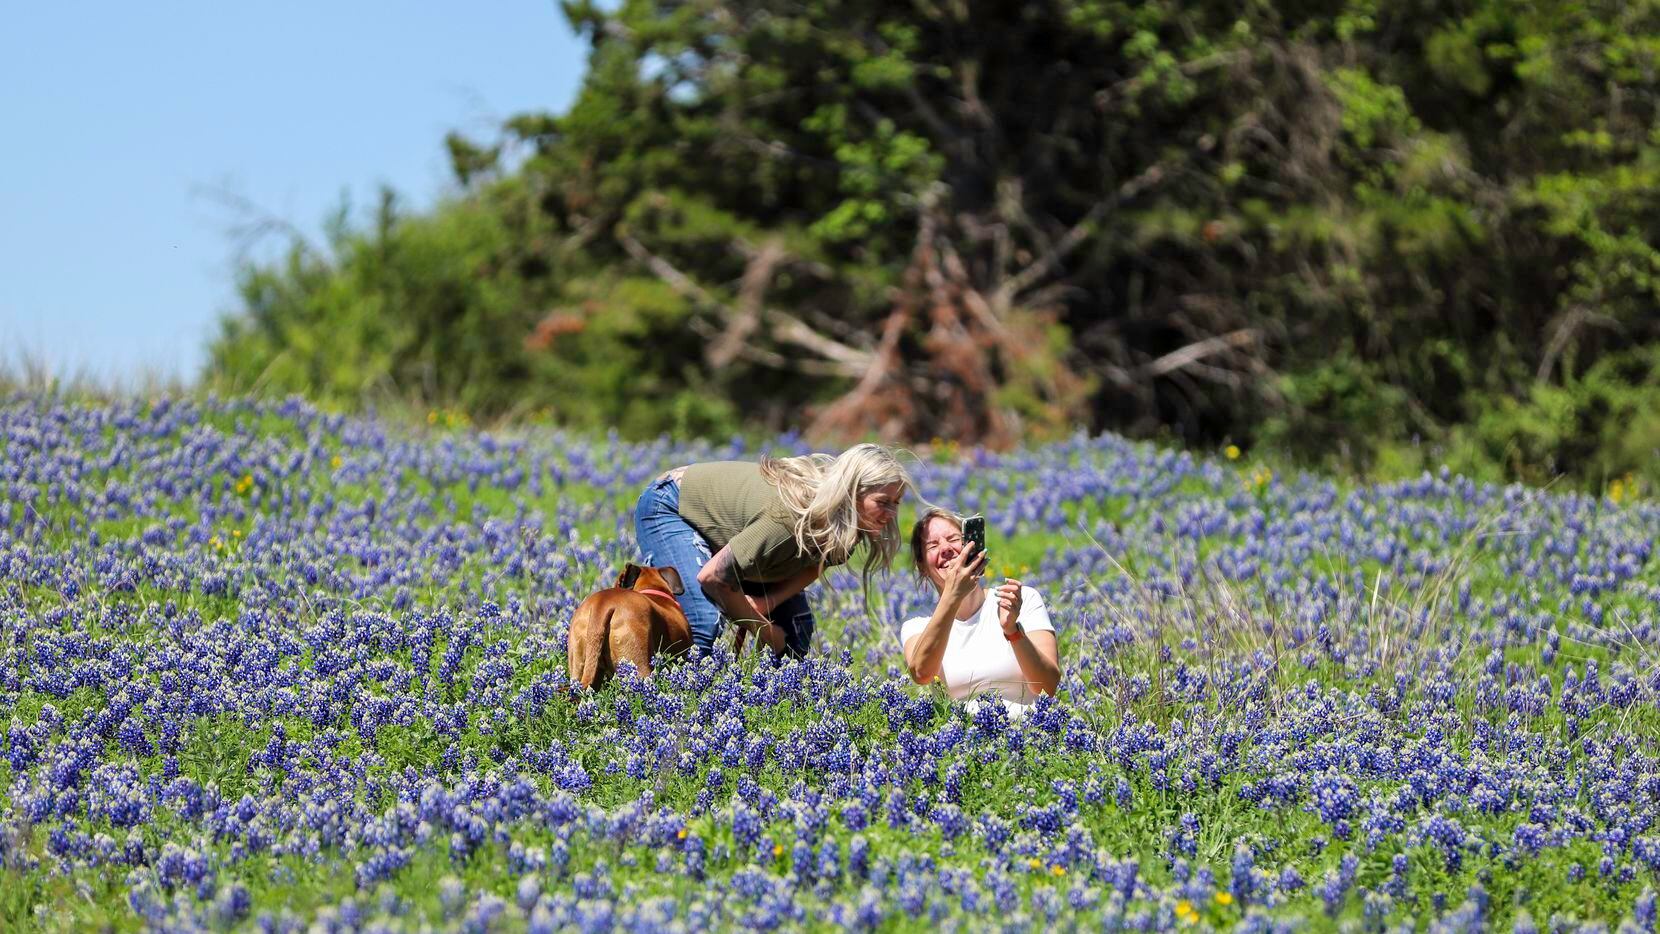 Kaitlyn Brown (left) and Brittanie Jordan of Roanoke review their shots in the bluebonnets...